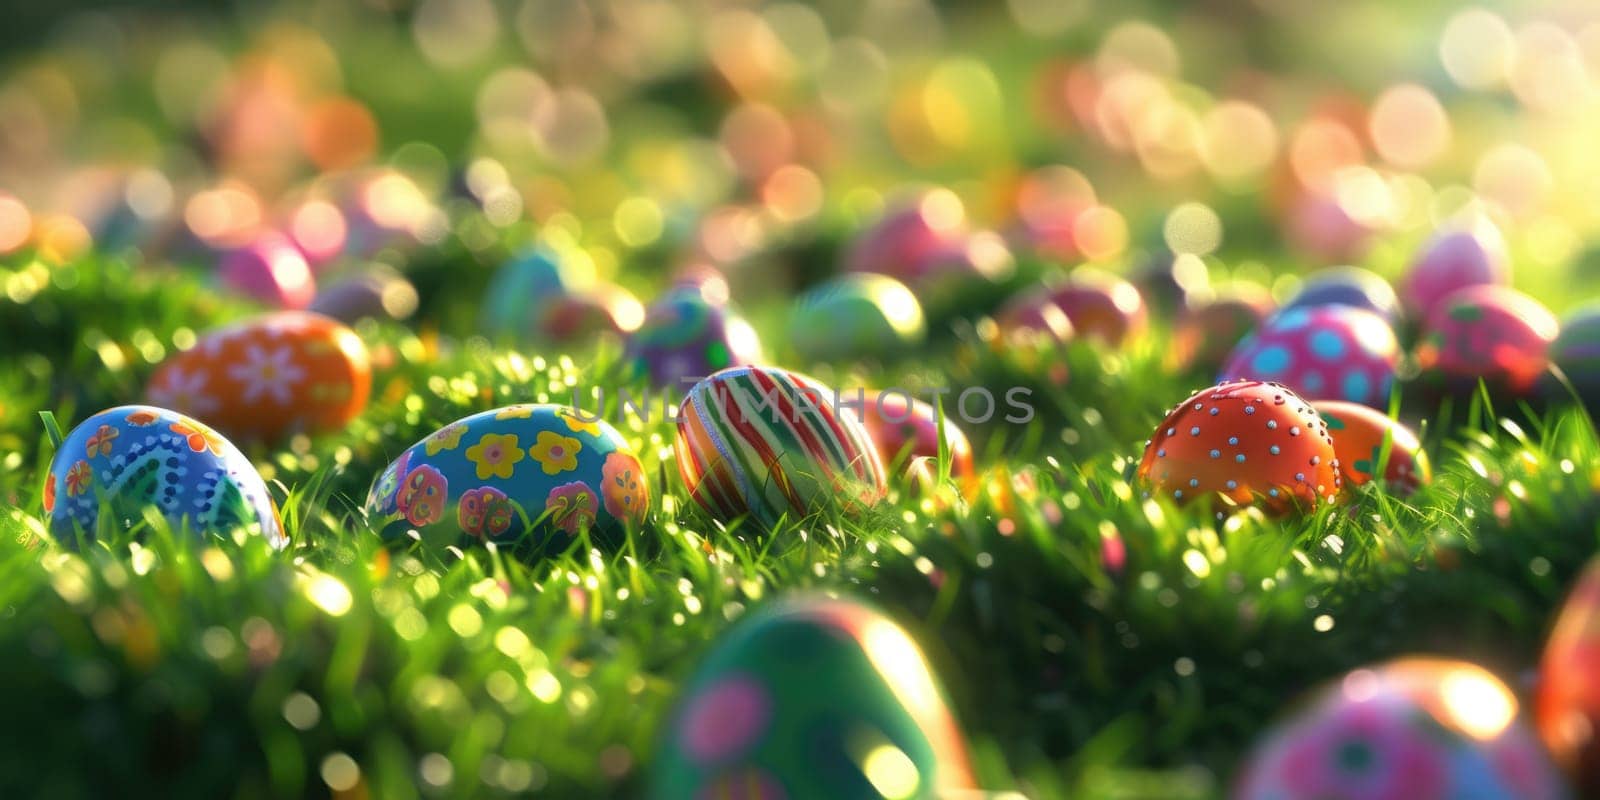 Colorful Easter eggs laid on the grass, forming a festive art display AIG42E by biancoblue